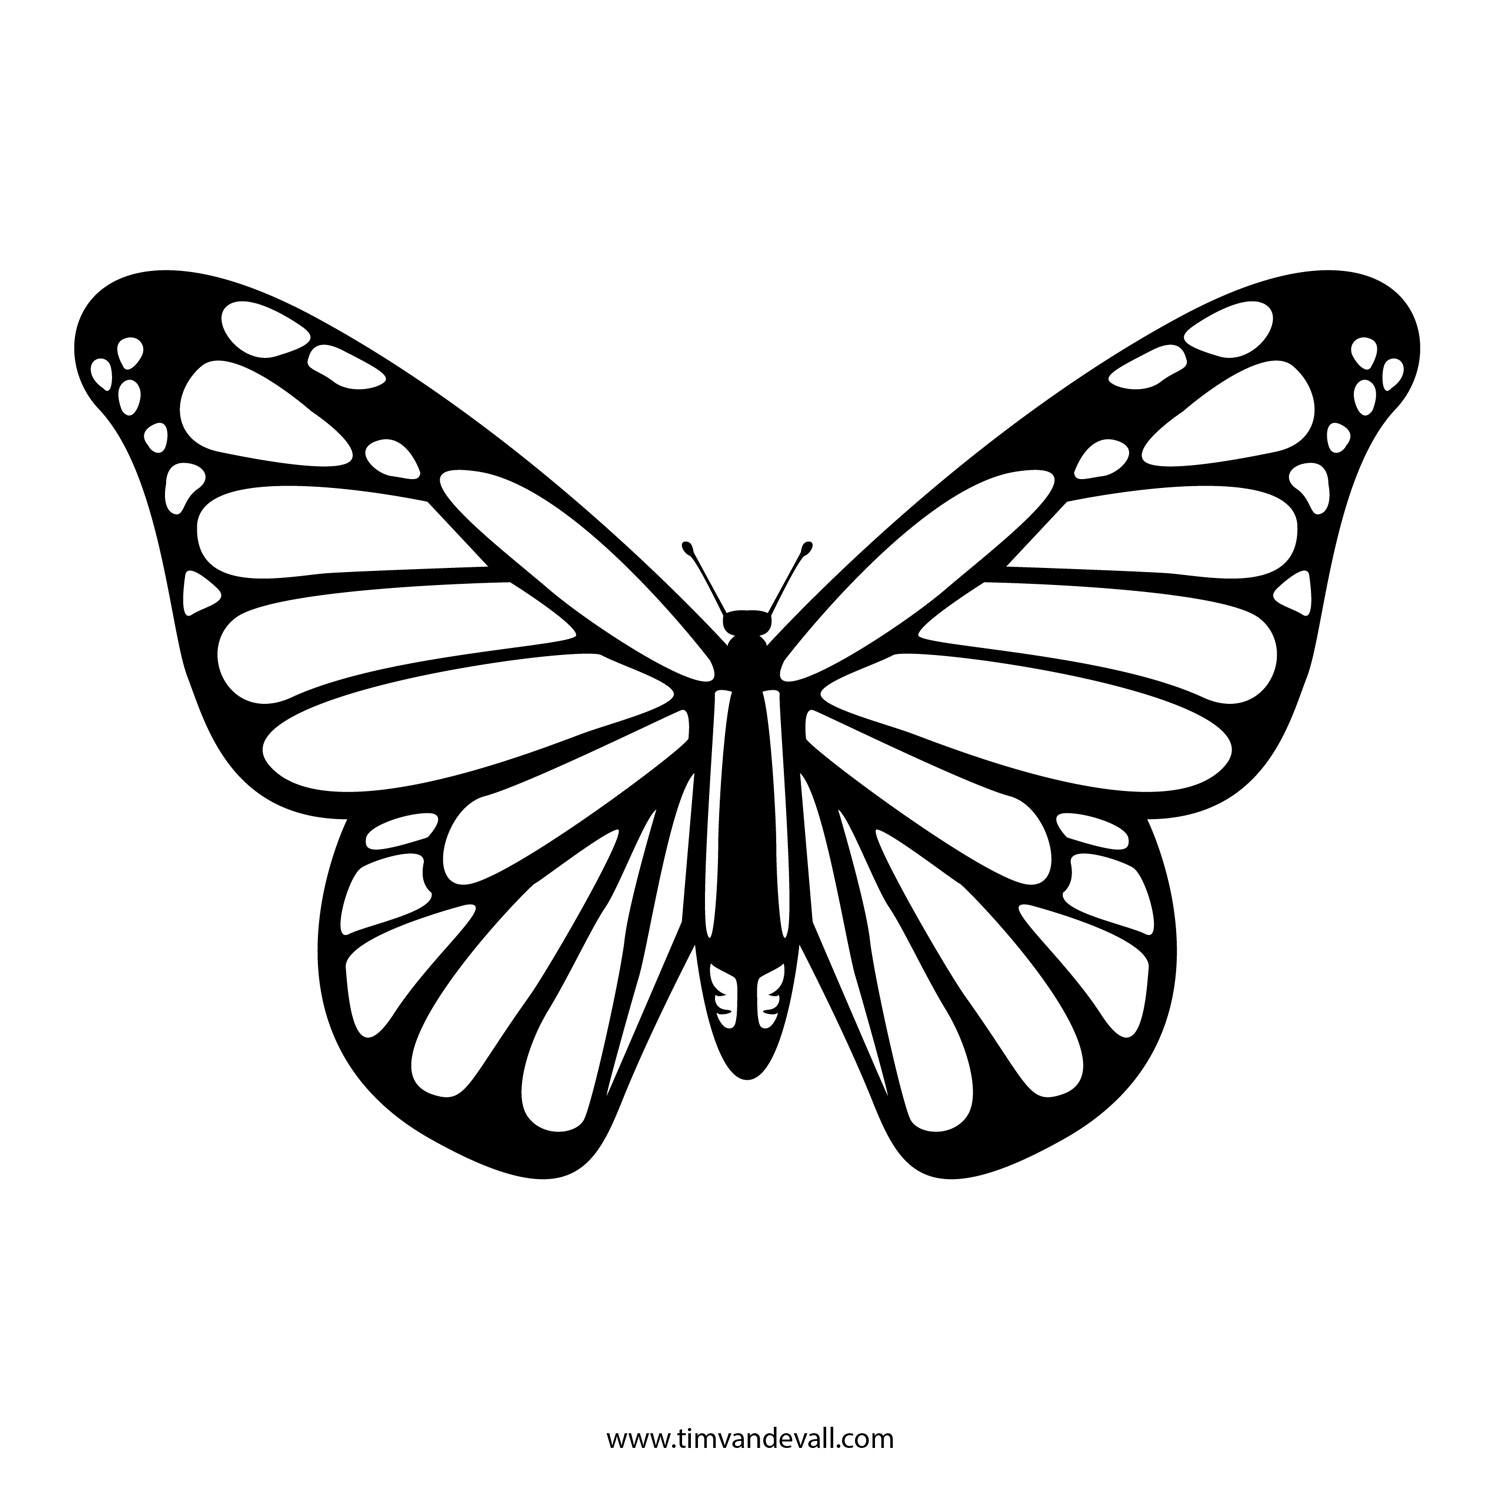 Butterfly black and white monarch butterfly clipart jpeg - Cliparting.com